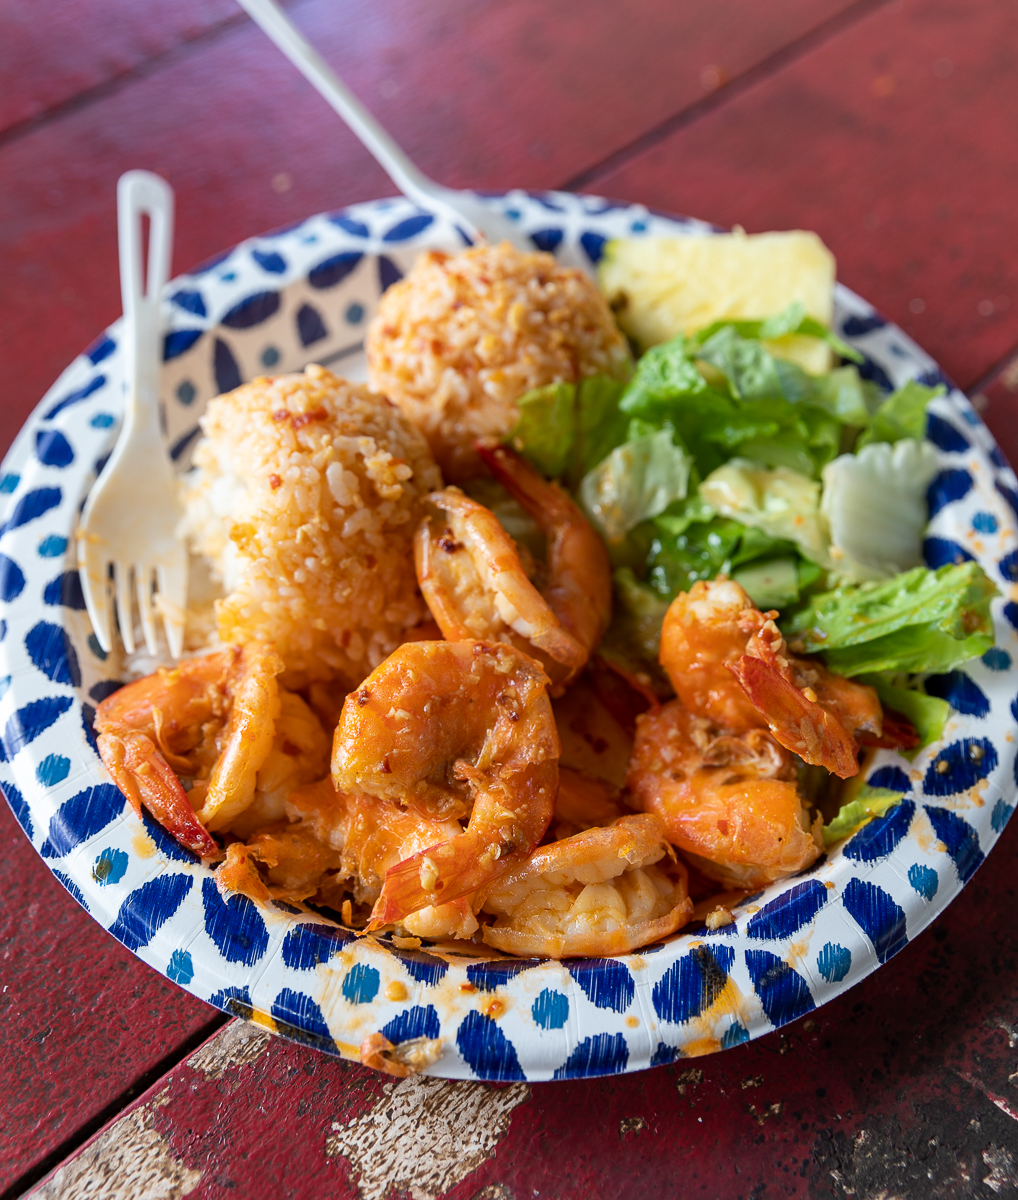 Spicy garlic shrimp plate that comes with rice, pineapple, and lettuce from Jenny's Shrimp Truck in North Shore